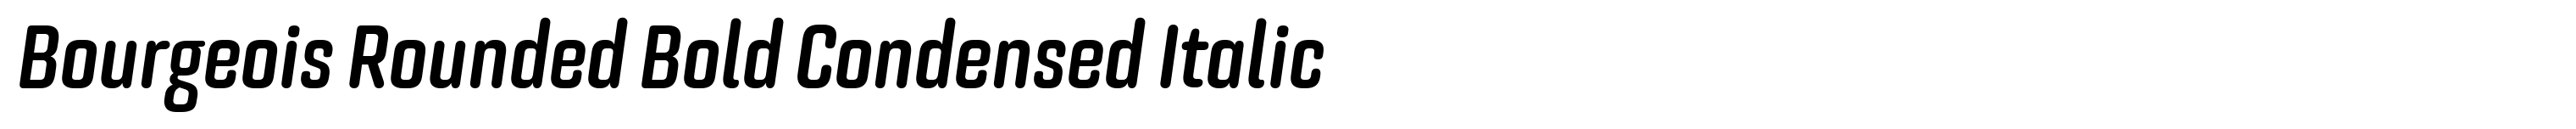 Bourgeois Rounded Bold Condensed Italic